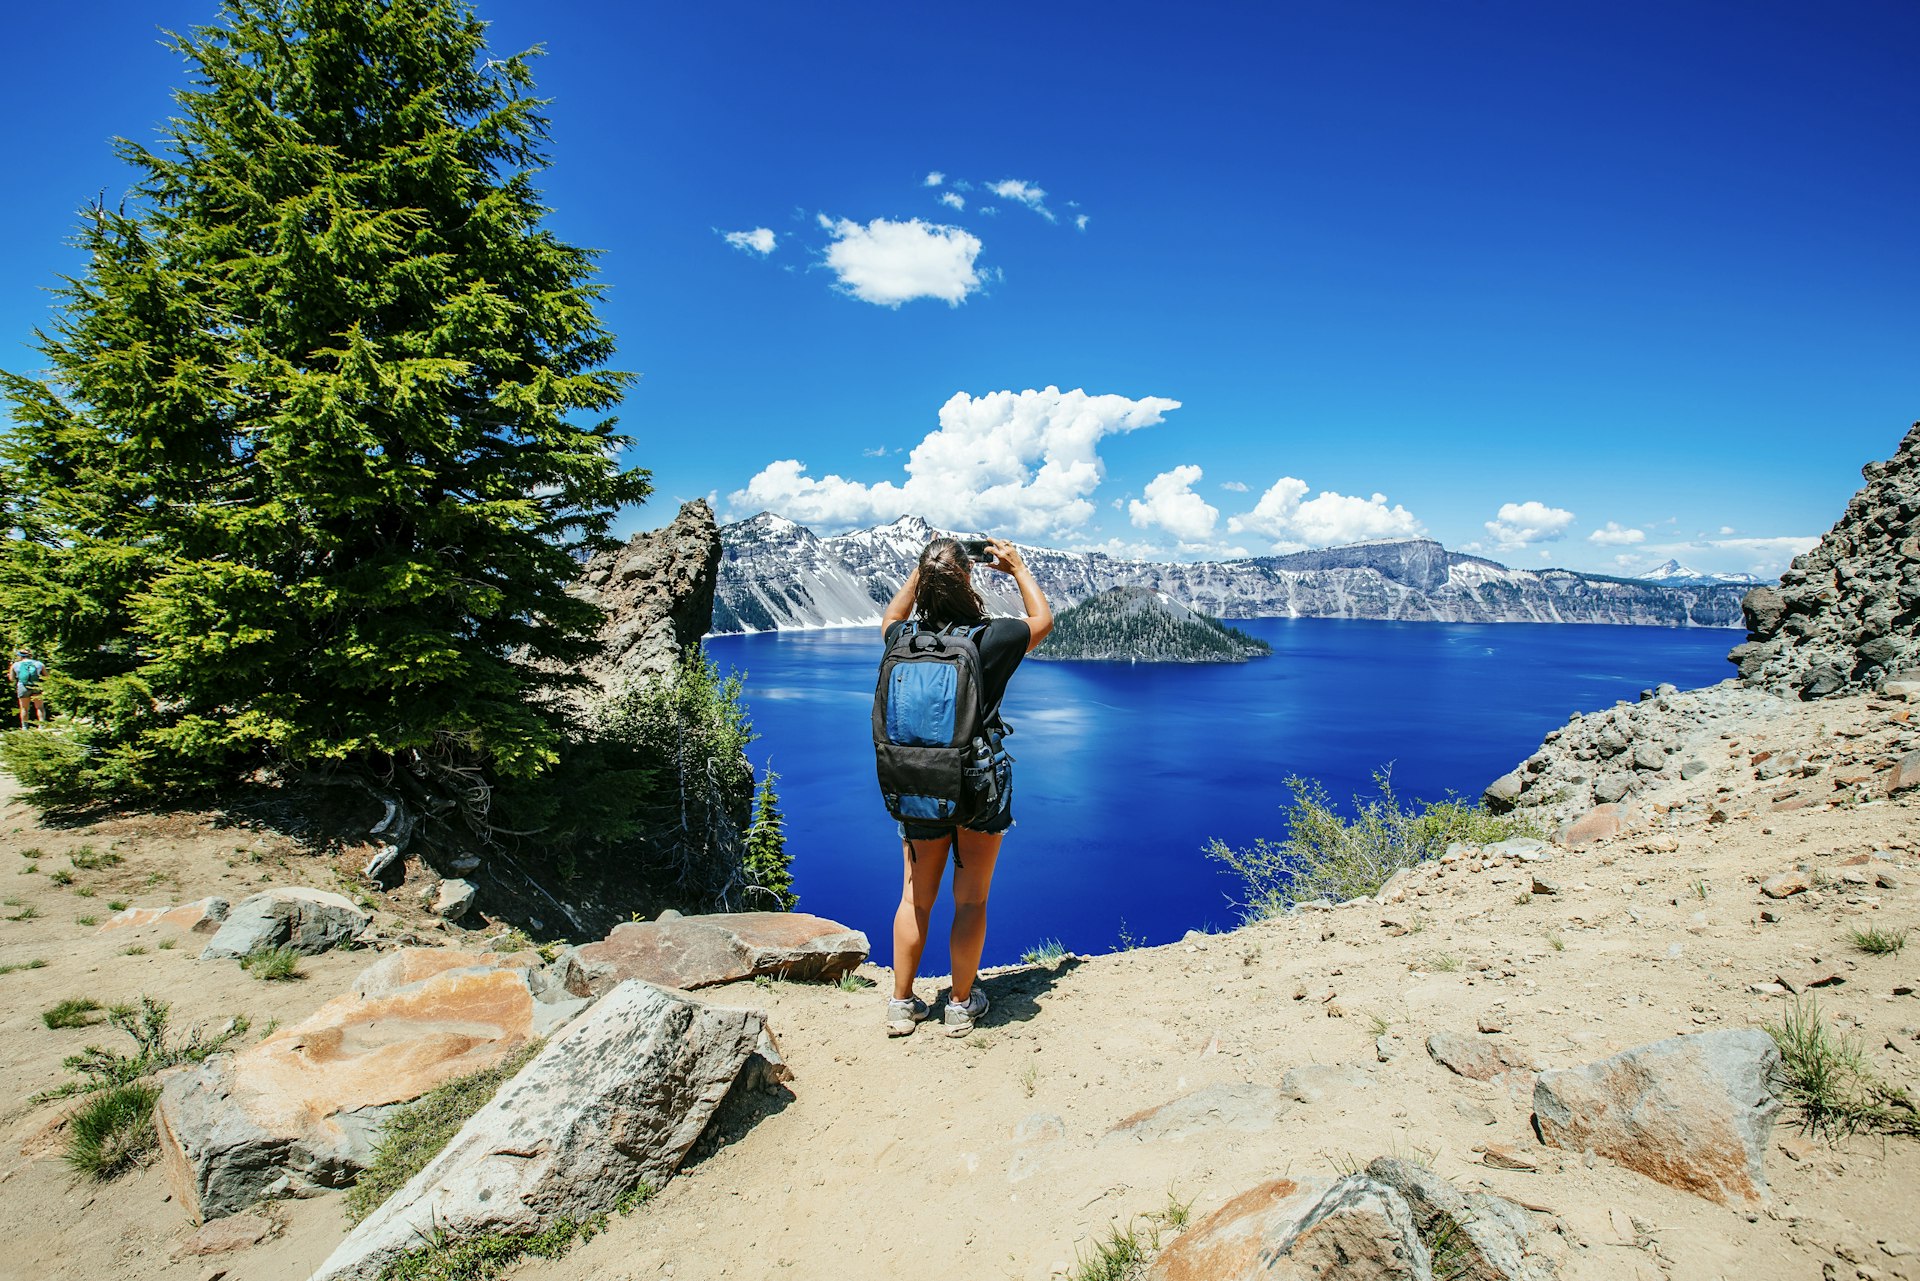 A backpacker stops to take in the splendor of Crater Lake National Park, Oregon